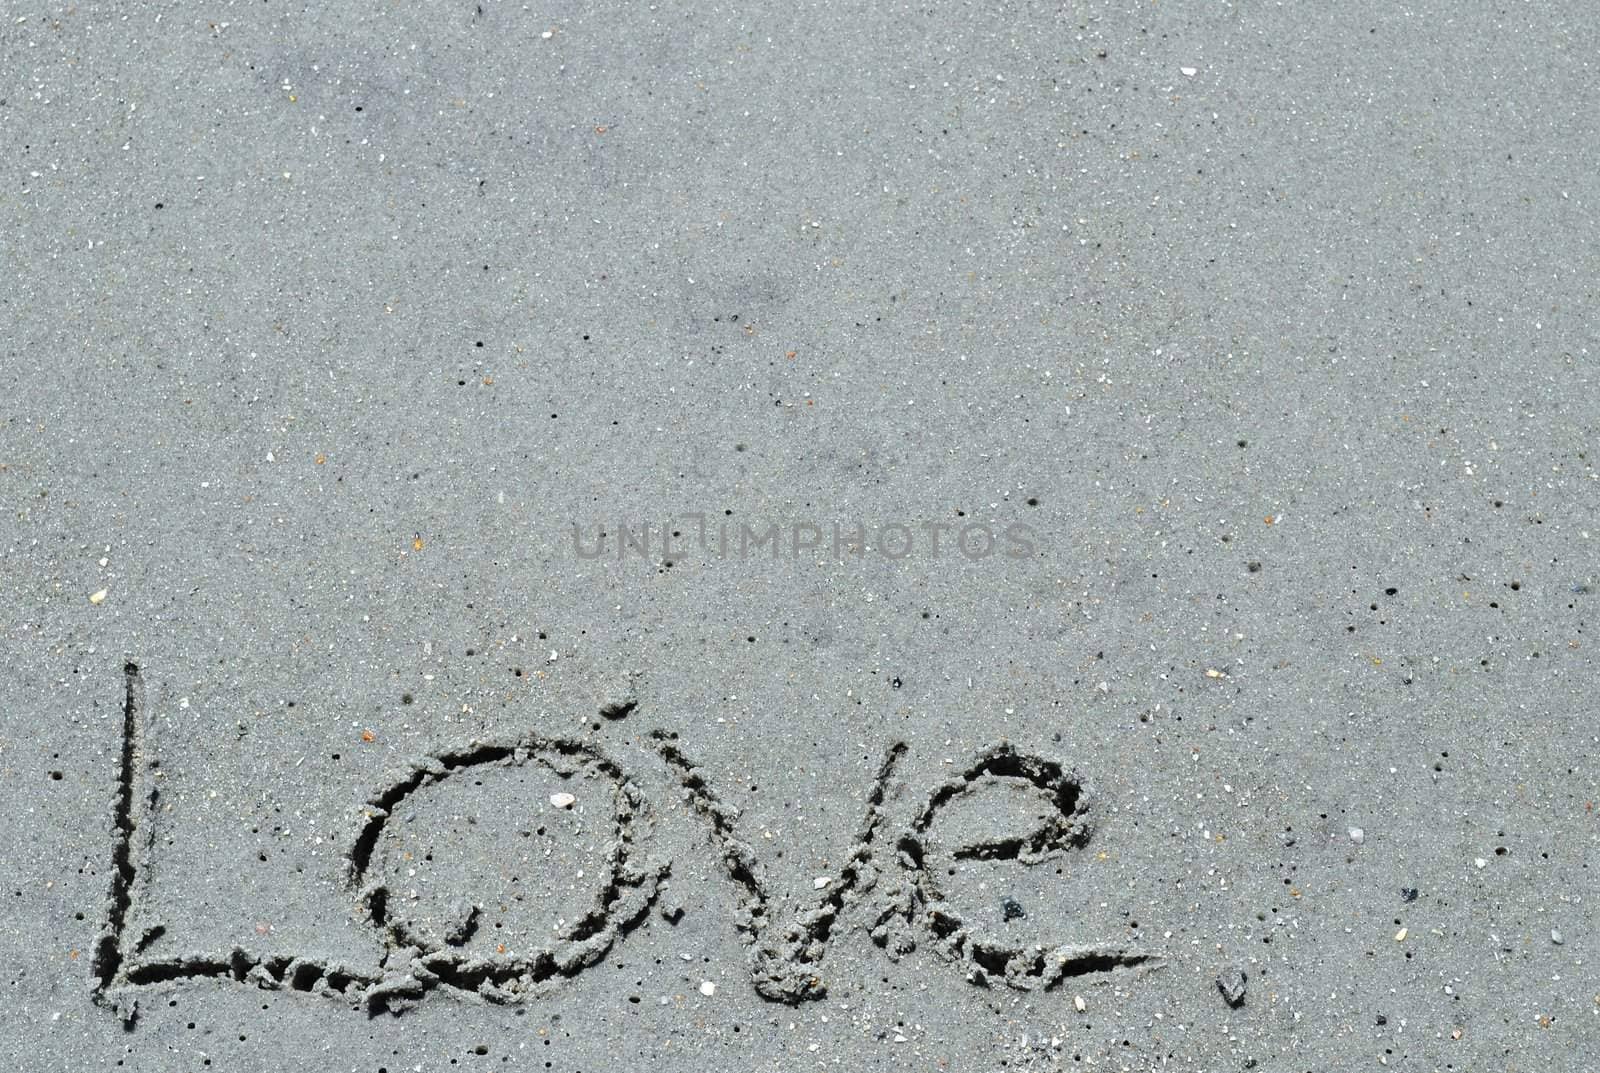 Love In the Sand by RefocusPhoto